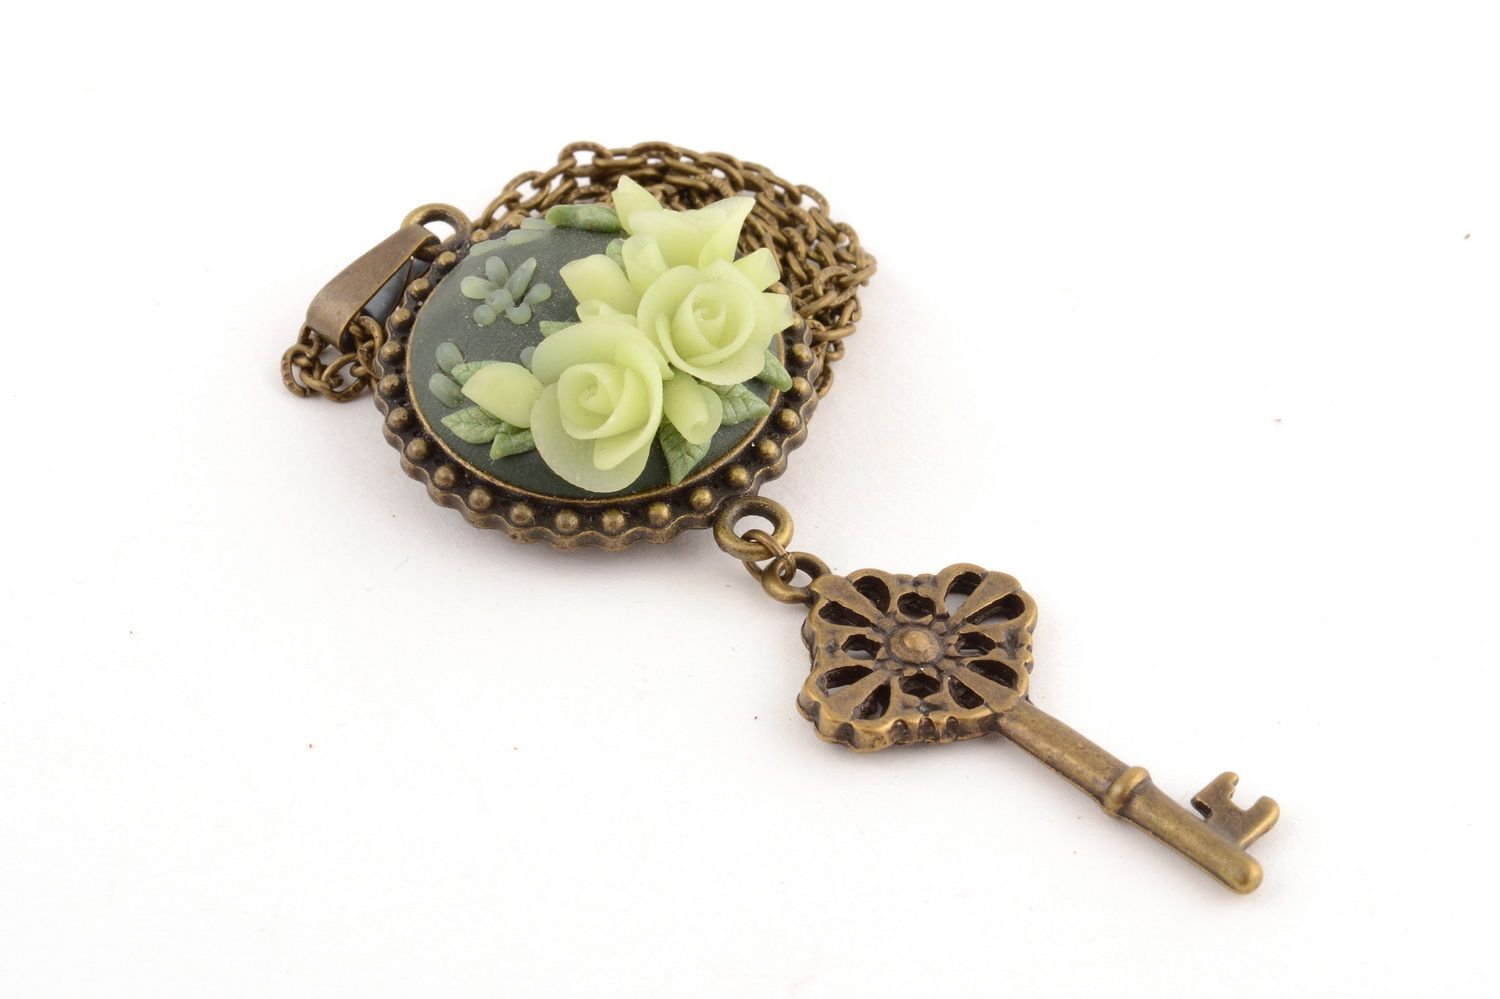 Handmade metal key shaped pendant on chain with light polymer clay flowers photo 4